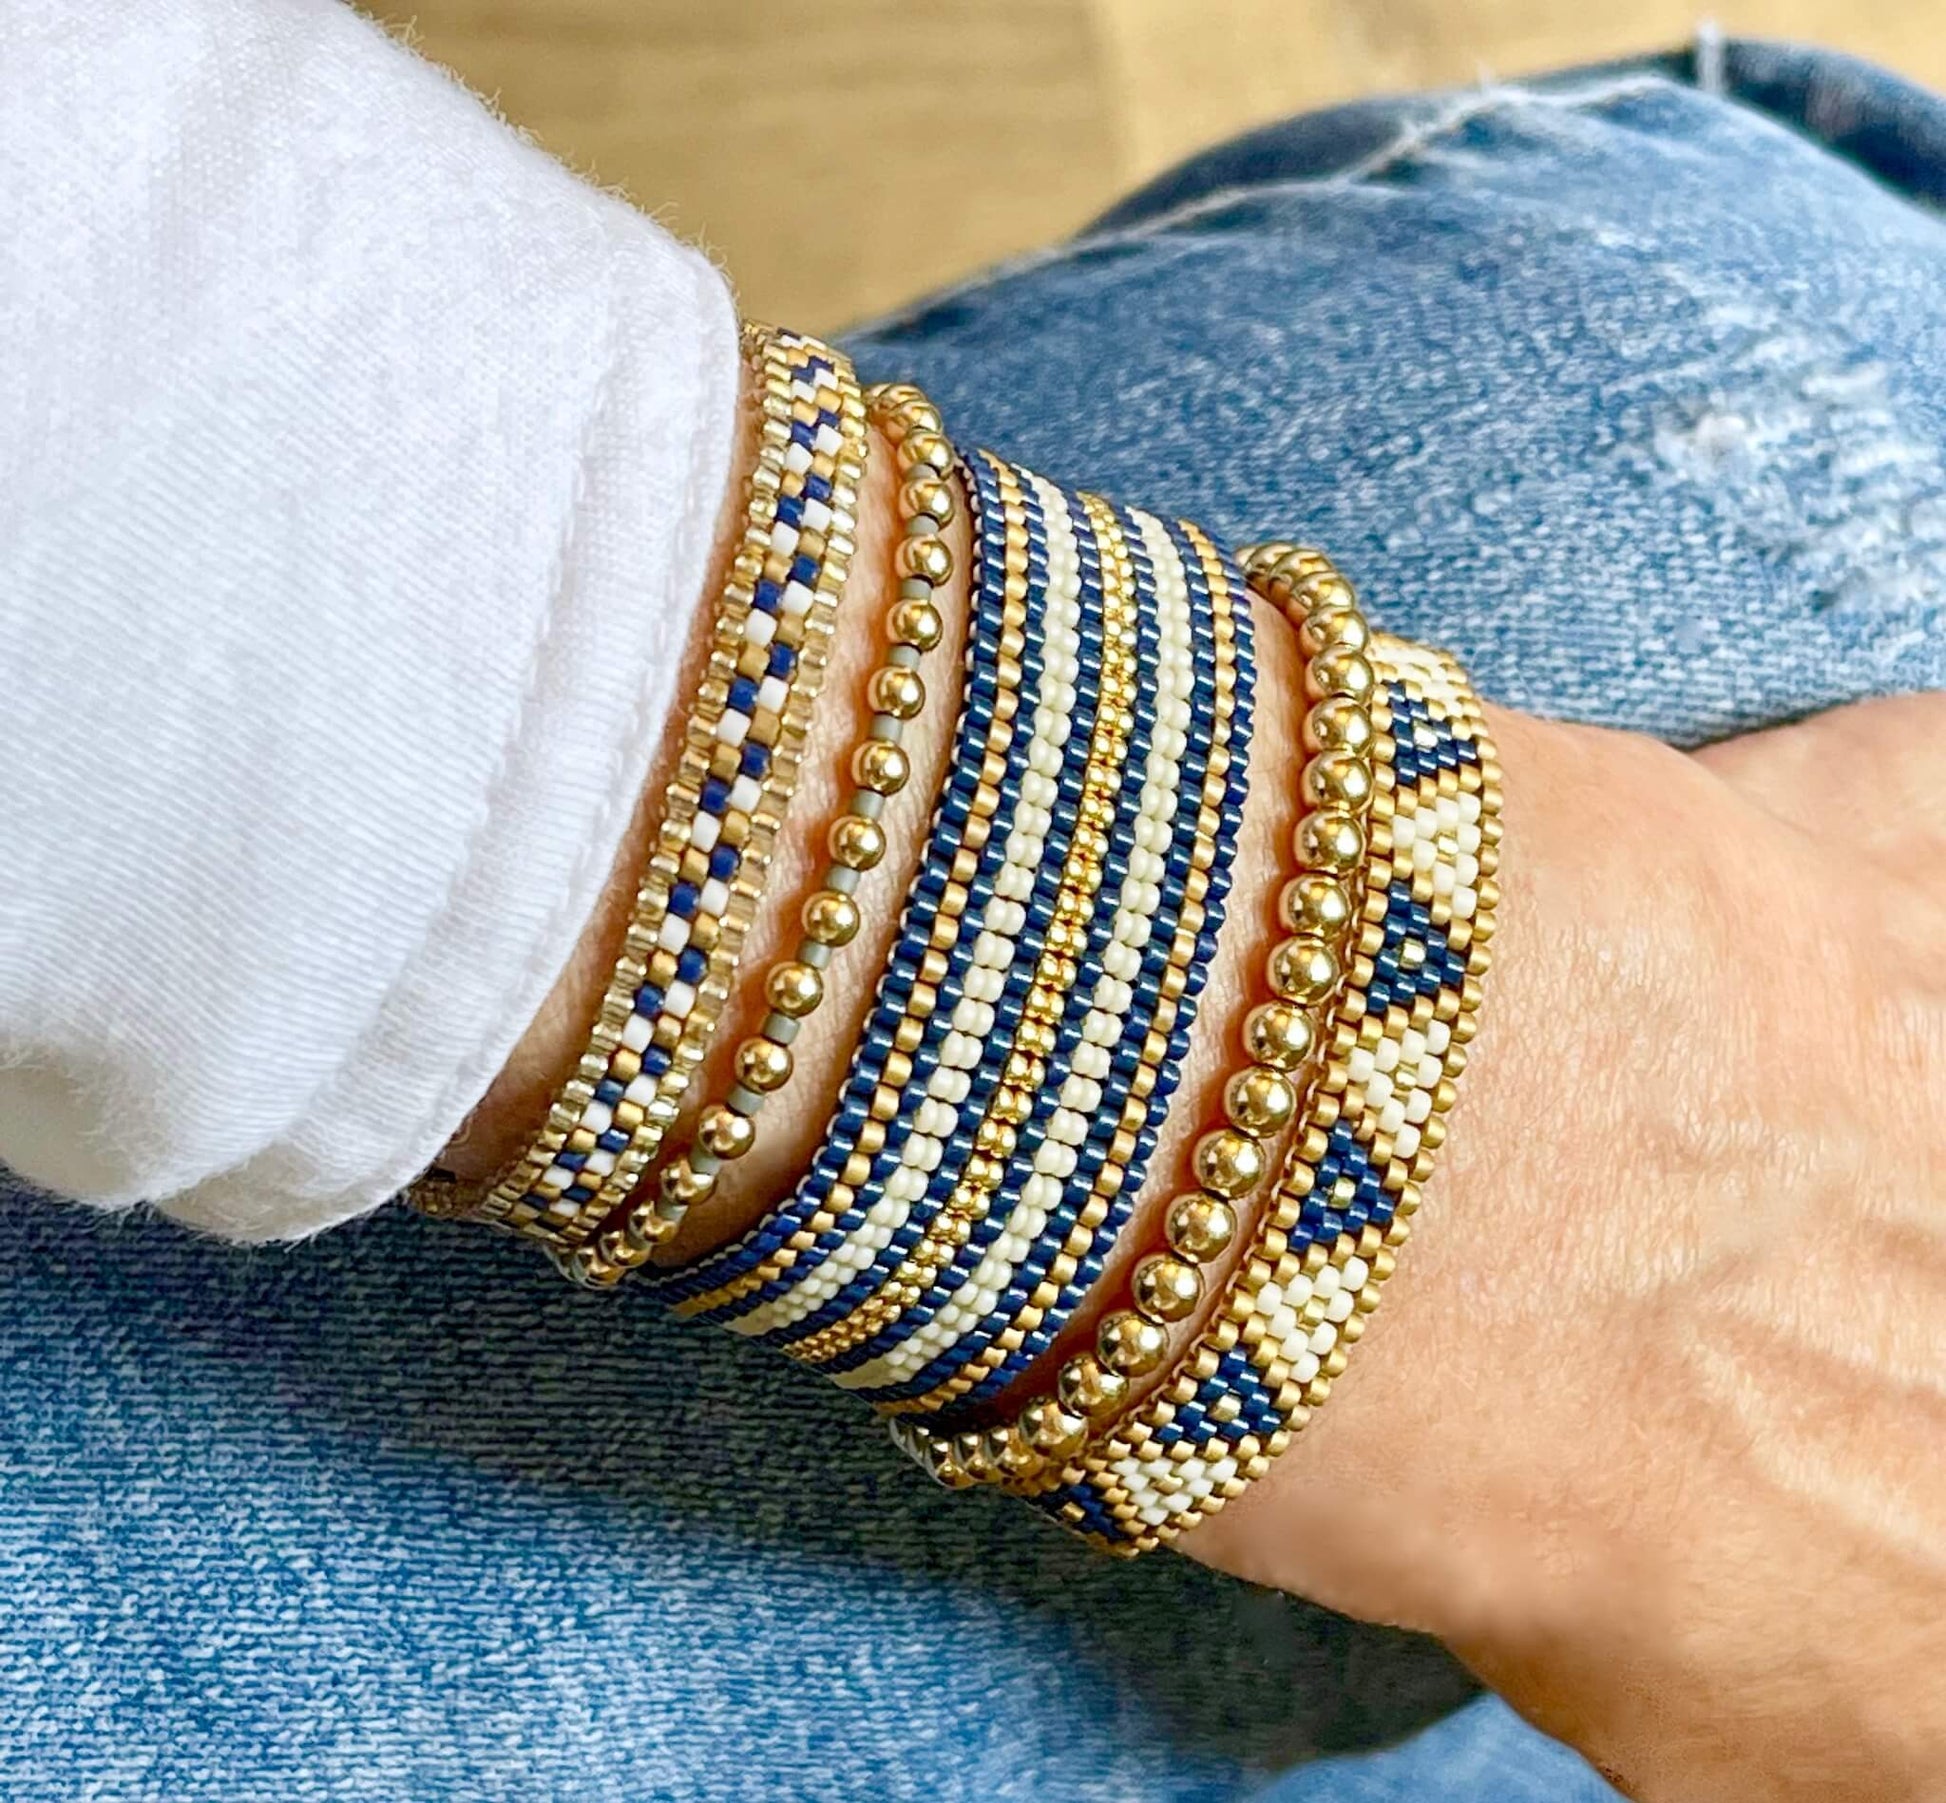 Gold ball bead bracelets stacked with flat beaded bracelets. Preppy nautical colors and patterns. Navy, white, and gold stripes and triangles.